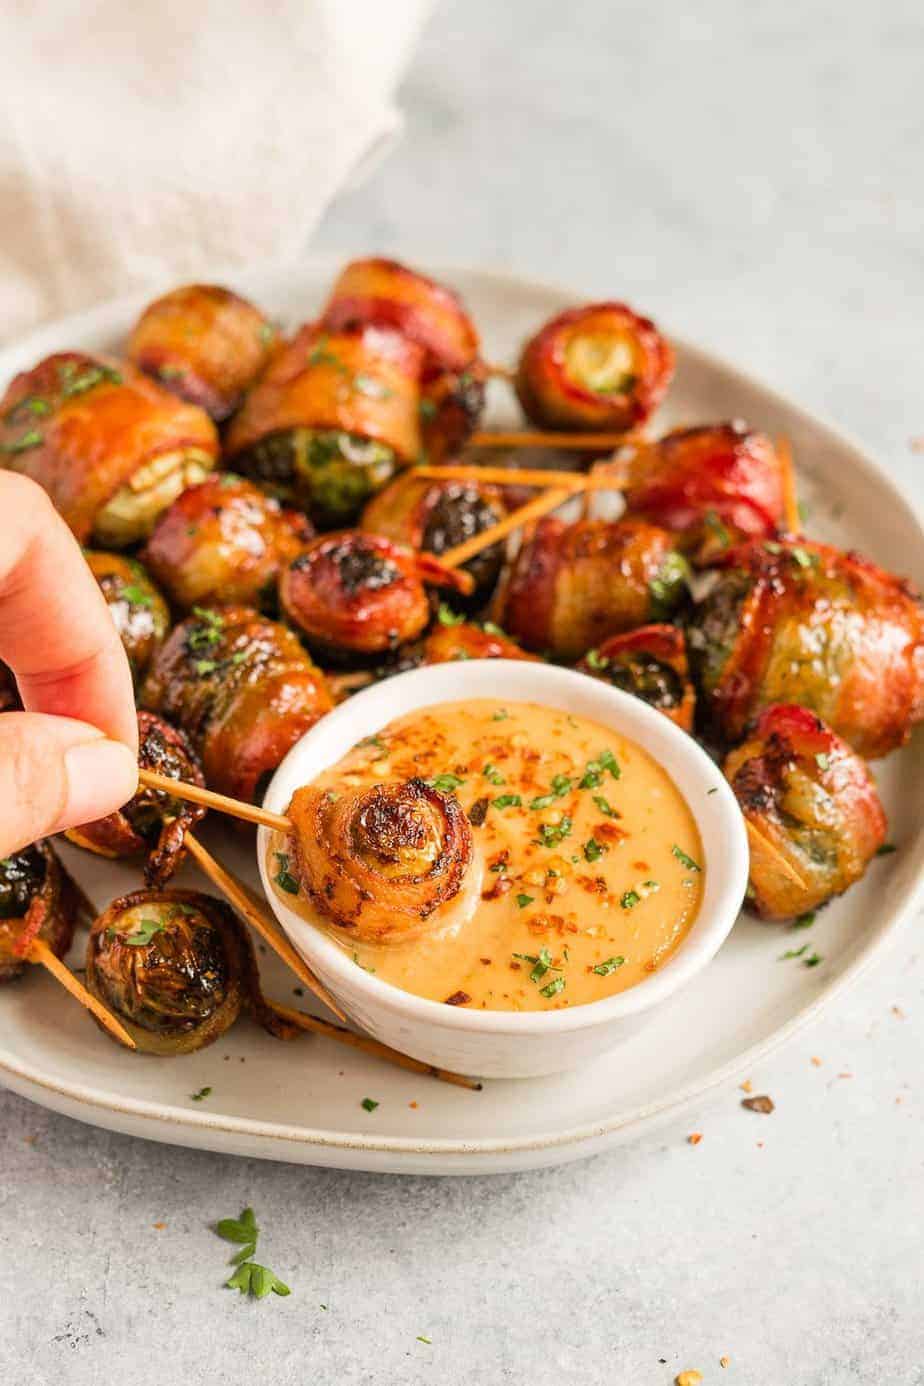 Dipping one bacon wrapped Brussels sprout in the tahini sauce.